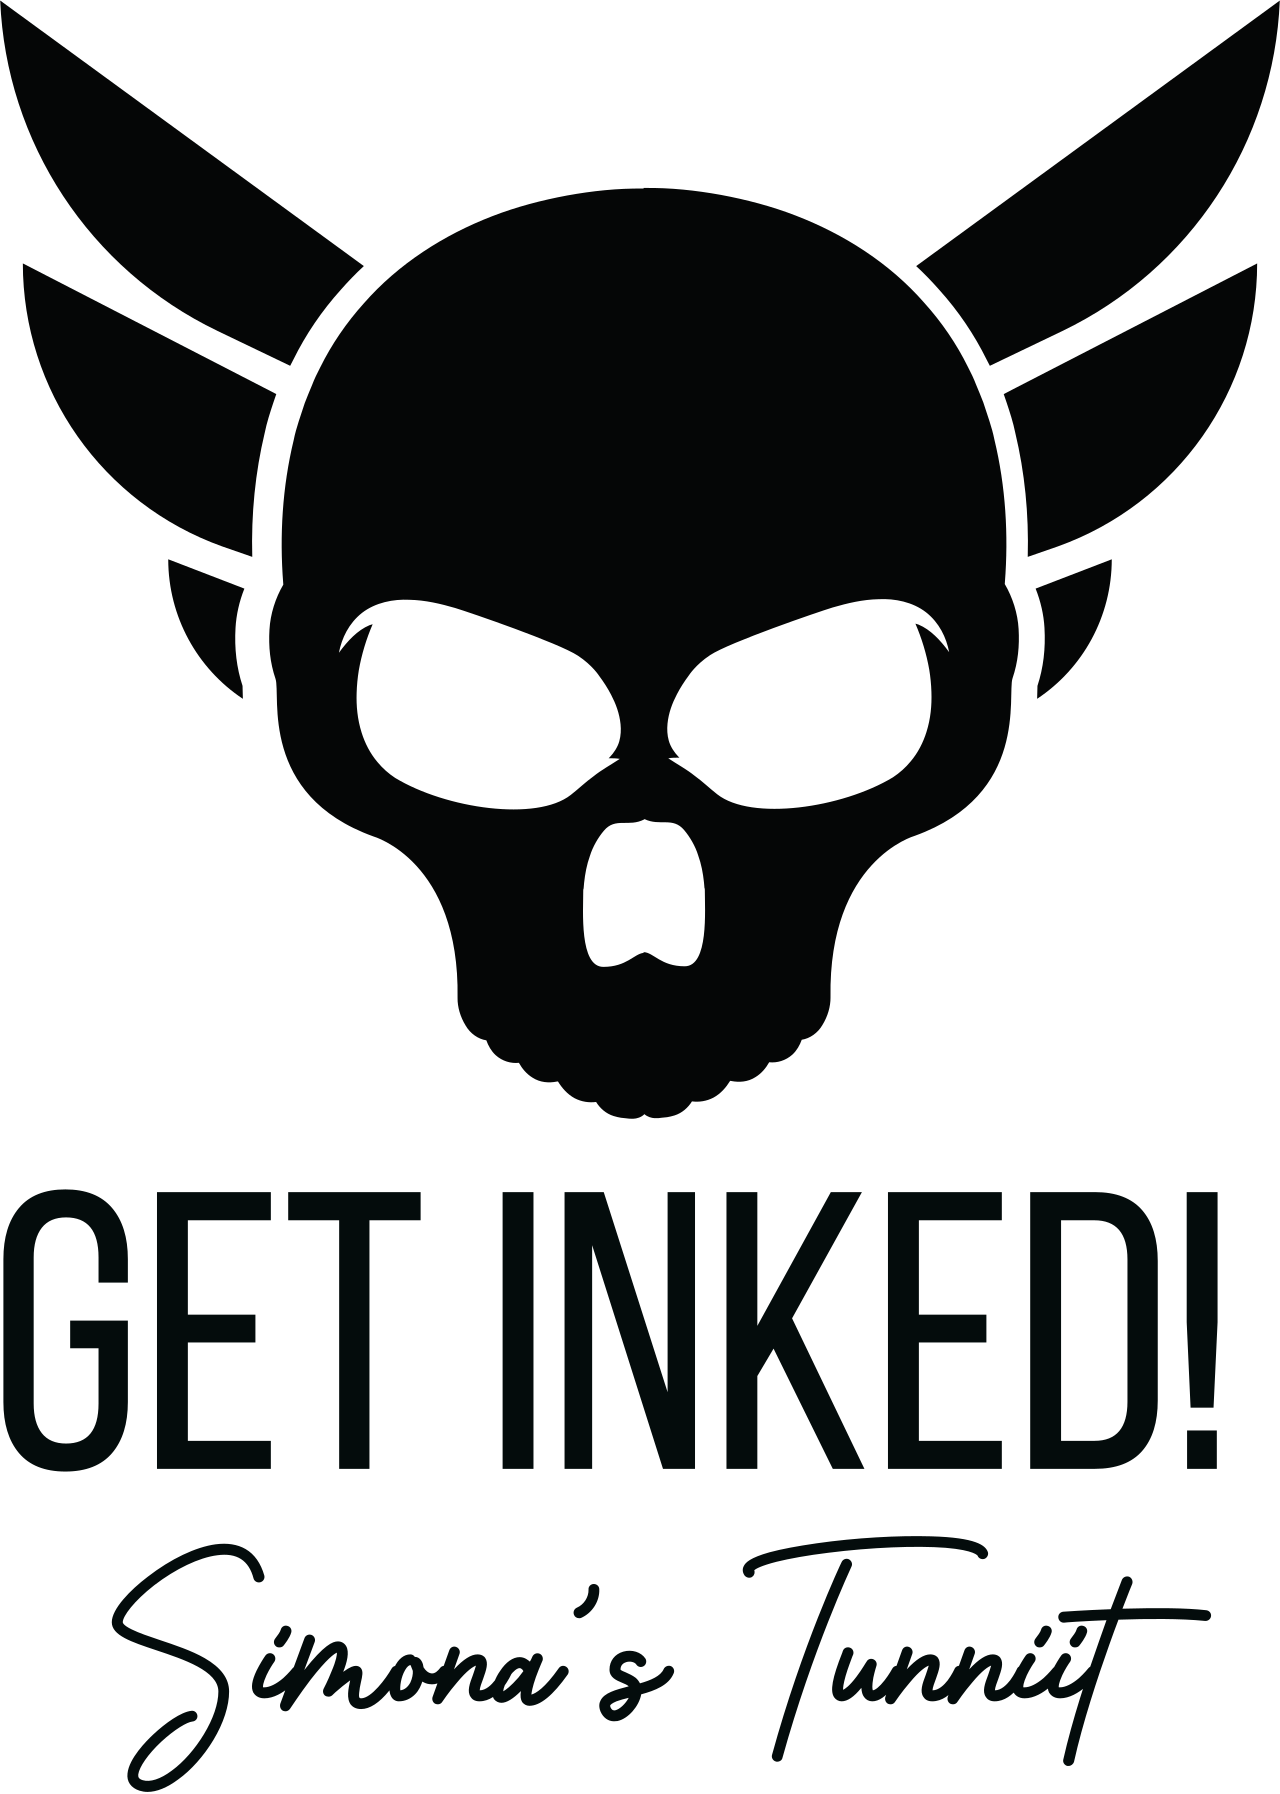 Get Inked!'s web page